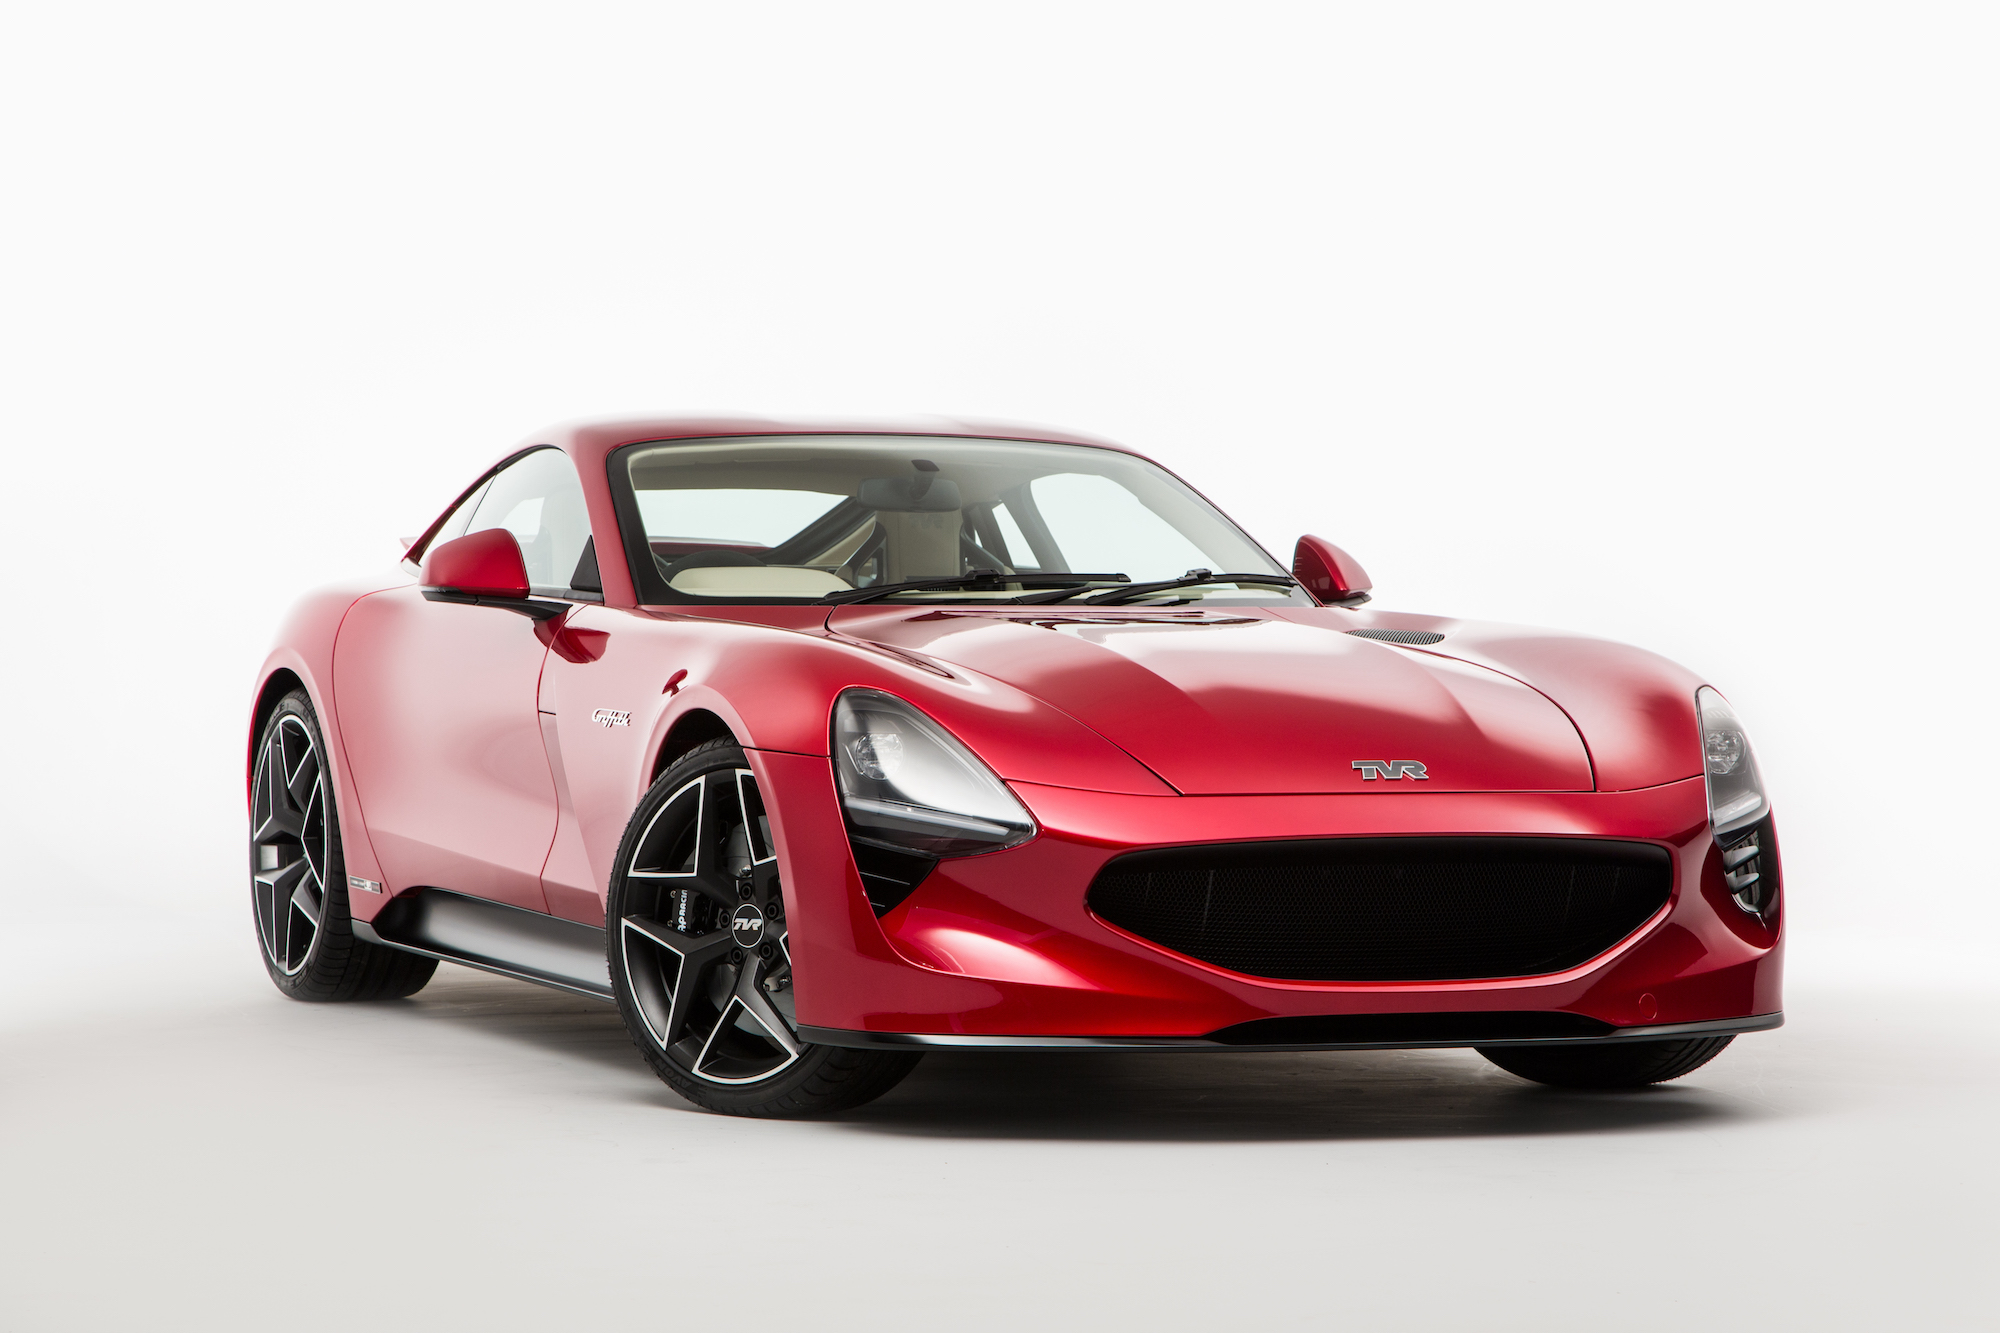 TVR Chairman, Les Edgar, on Creating the Everyday TVR - London Concours